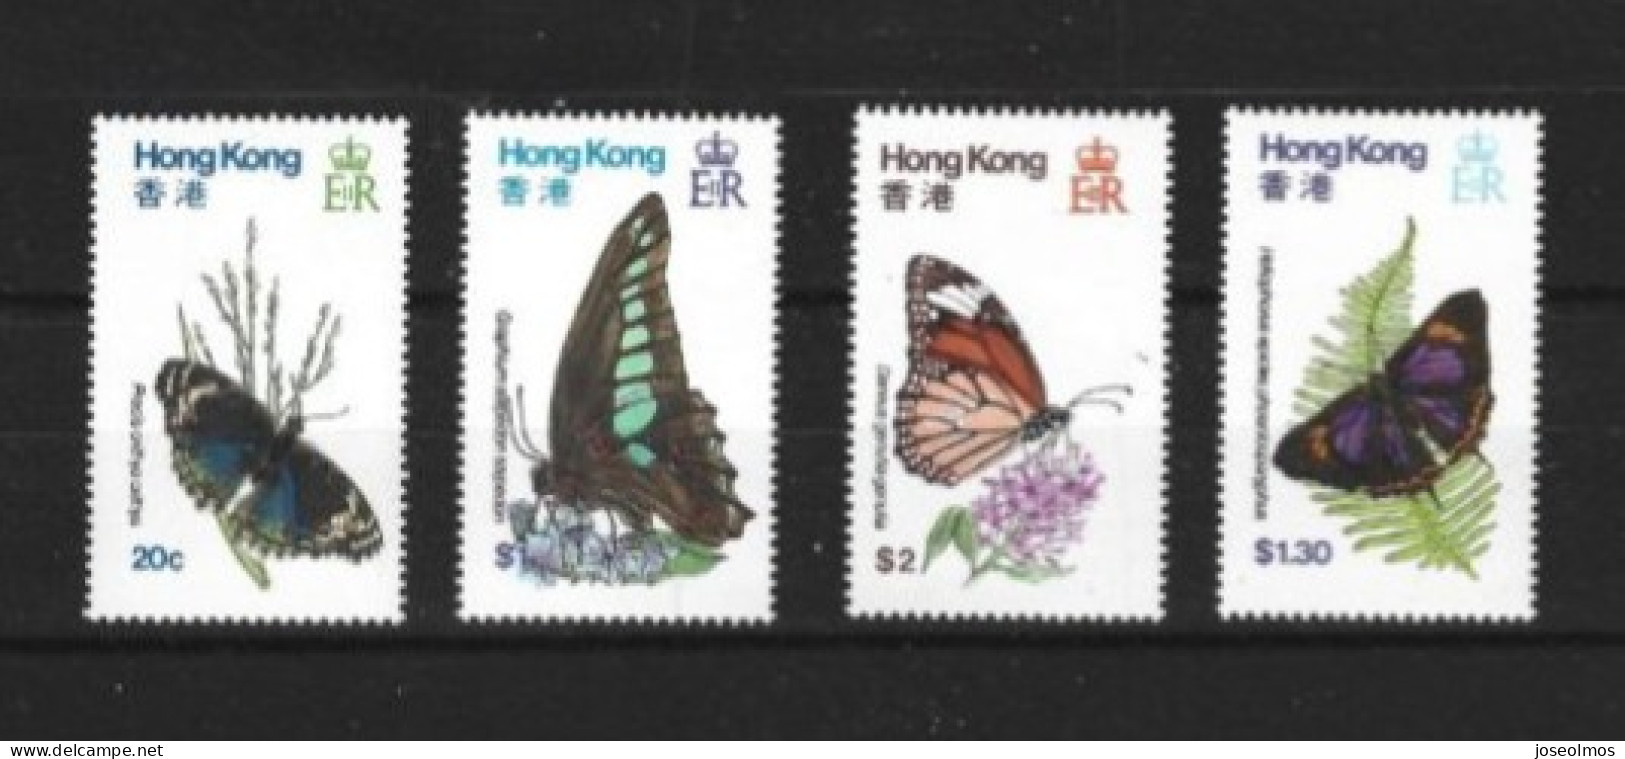 TIMBRES SERIE PAPILLON ANNEE 1979 NEUF** N° 380- 383 SYTANLEY GIBBONS - Lots & Serien